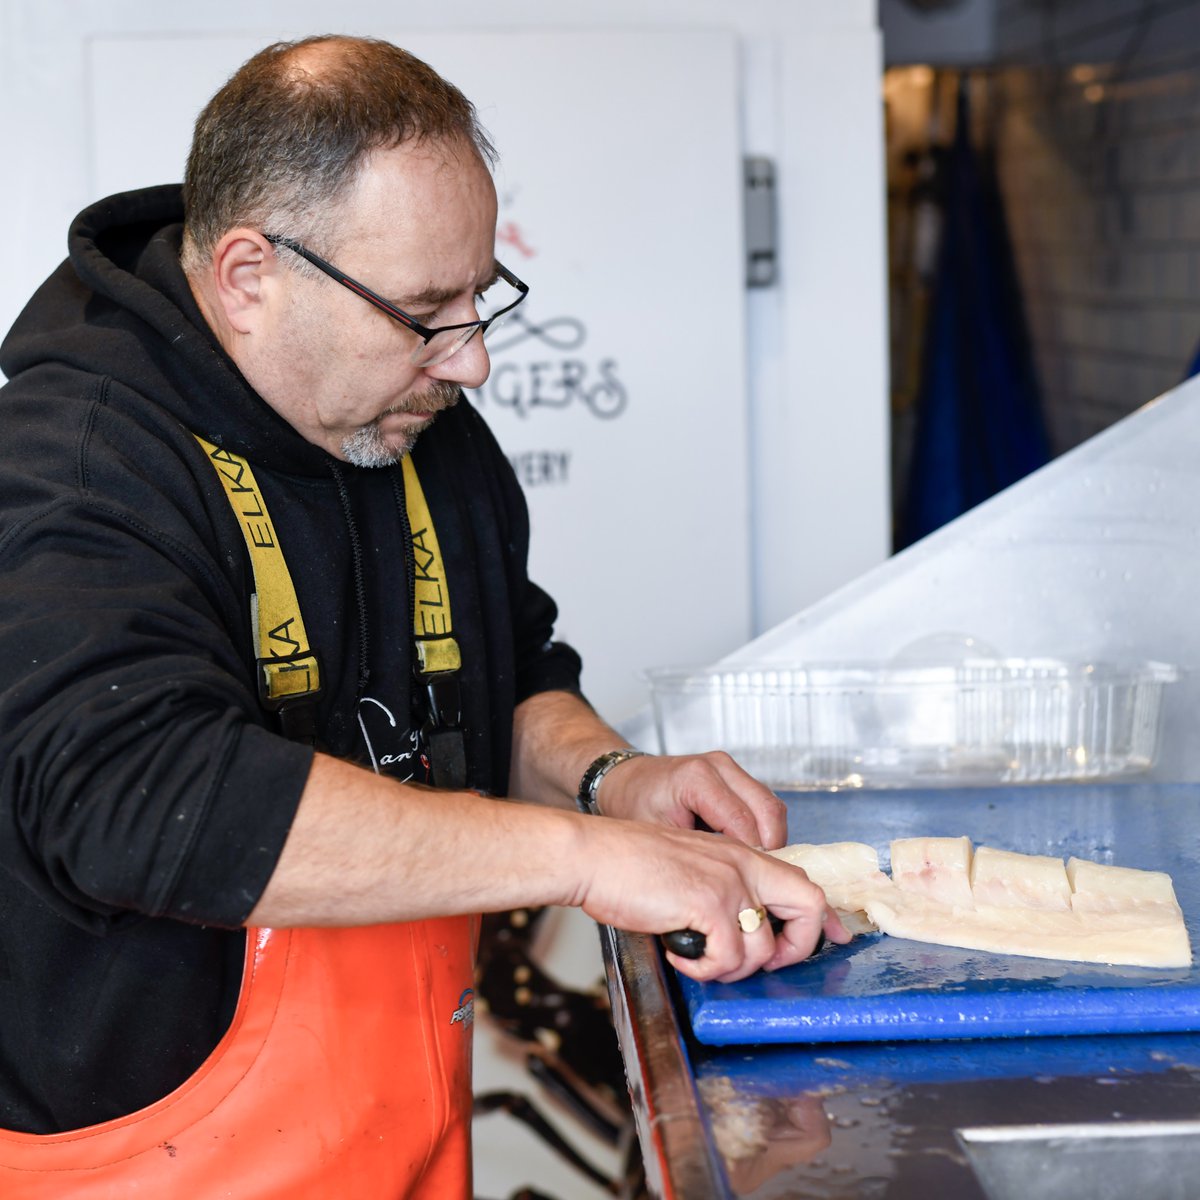 Three key components that any successful fishmonger must master: concentration, precision and speed 💪 Luckily for us, Graham at Tunbridge Wells has all three in spades… #tunbridgewells #kent #tonbridge #freshfish #freshseafood #catchoftheday #rawfish #seafoodlover #seafoodlove